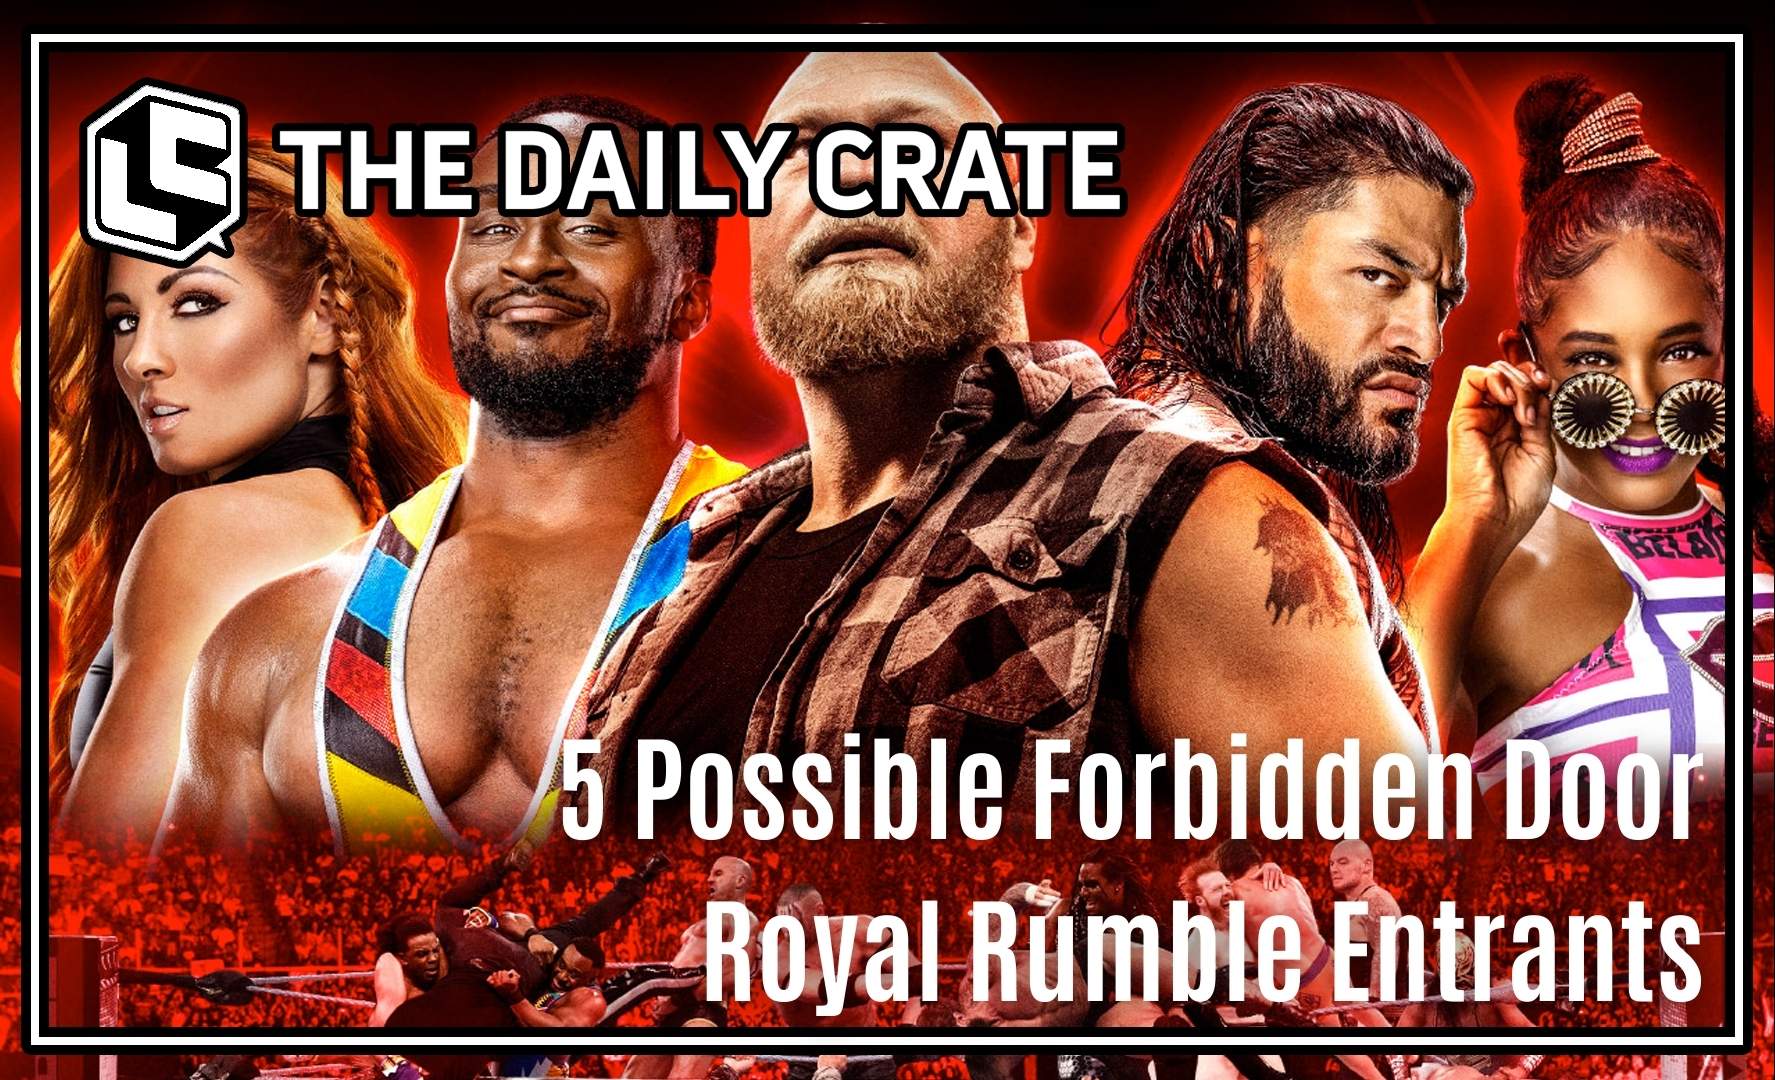 The Daily Crate | 5 Possible Forbidden Door Royal Rumble Entrants